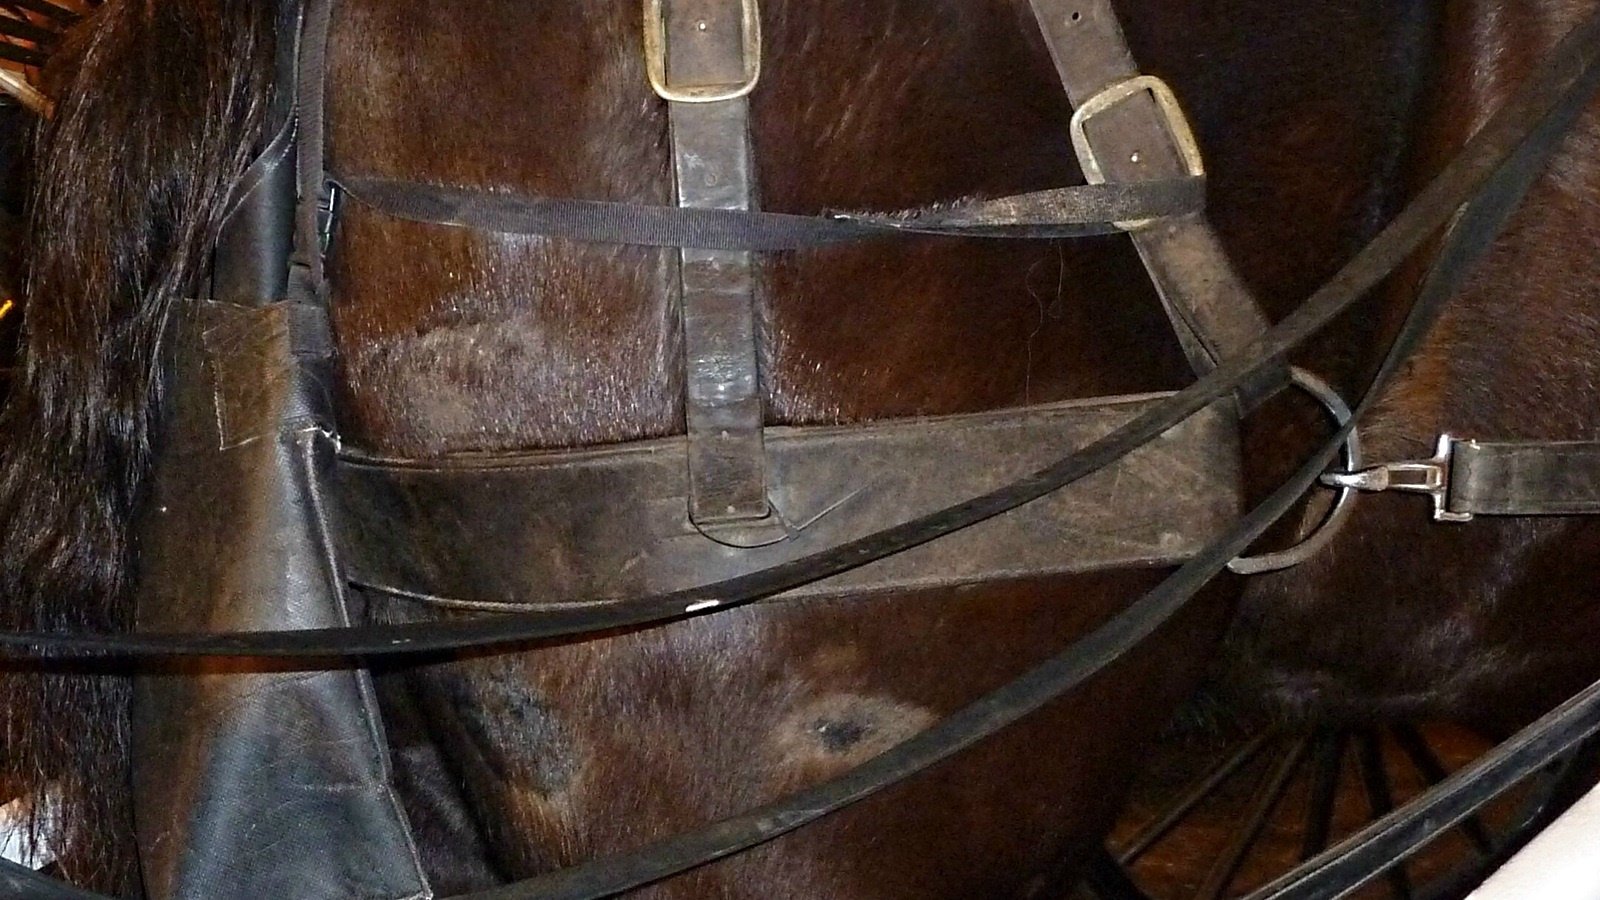  This photo shows another Atlanta carriage horse with and without the harness.  A harness should never be put on top of a sore, the horse should be allowed to rest until the sore is healed.  